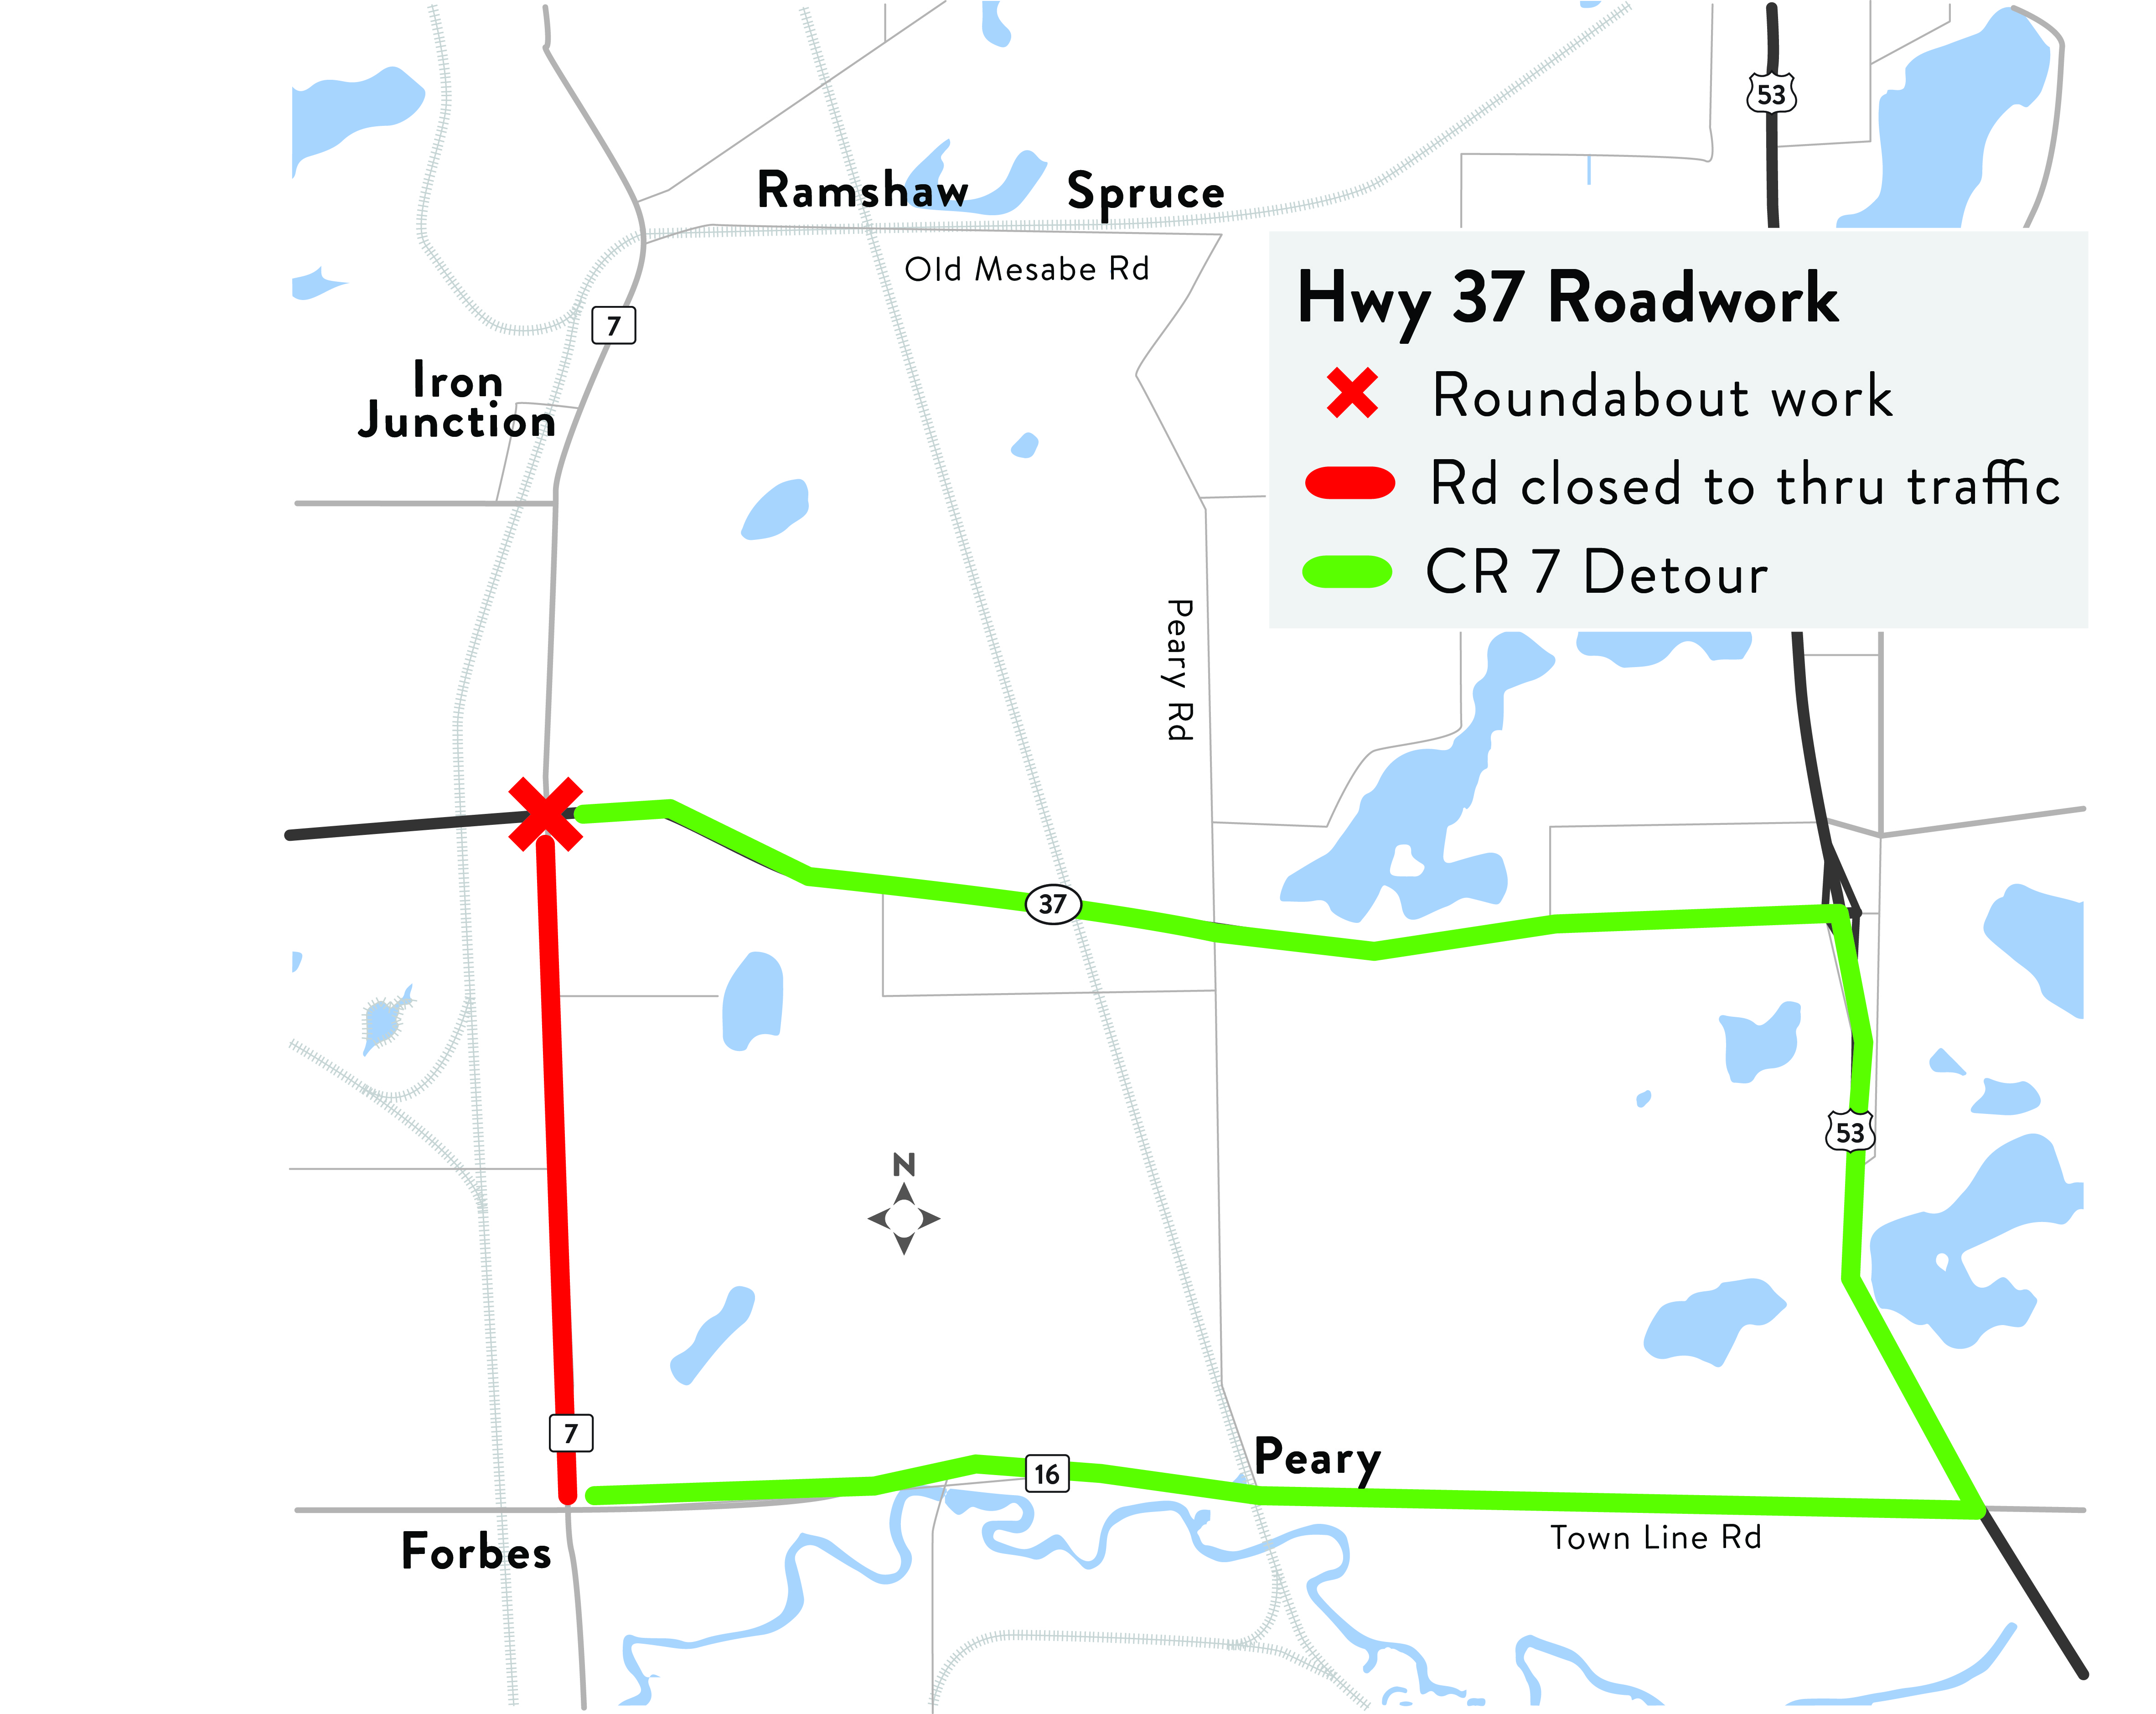 A rendering of the detour of Cty Rd 7.